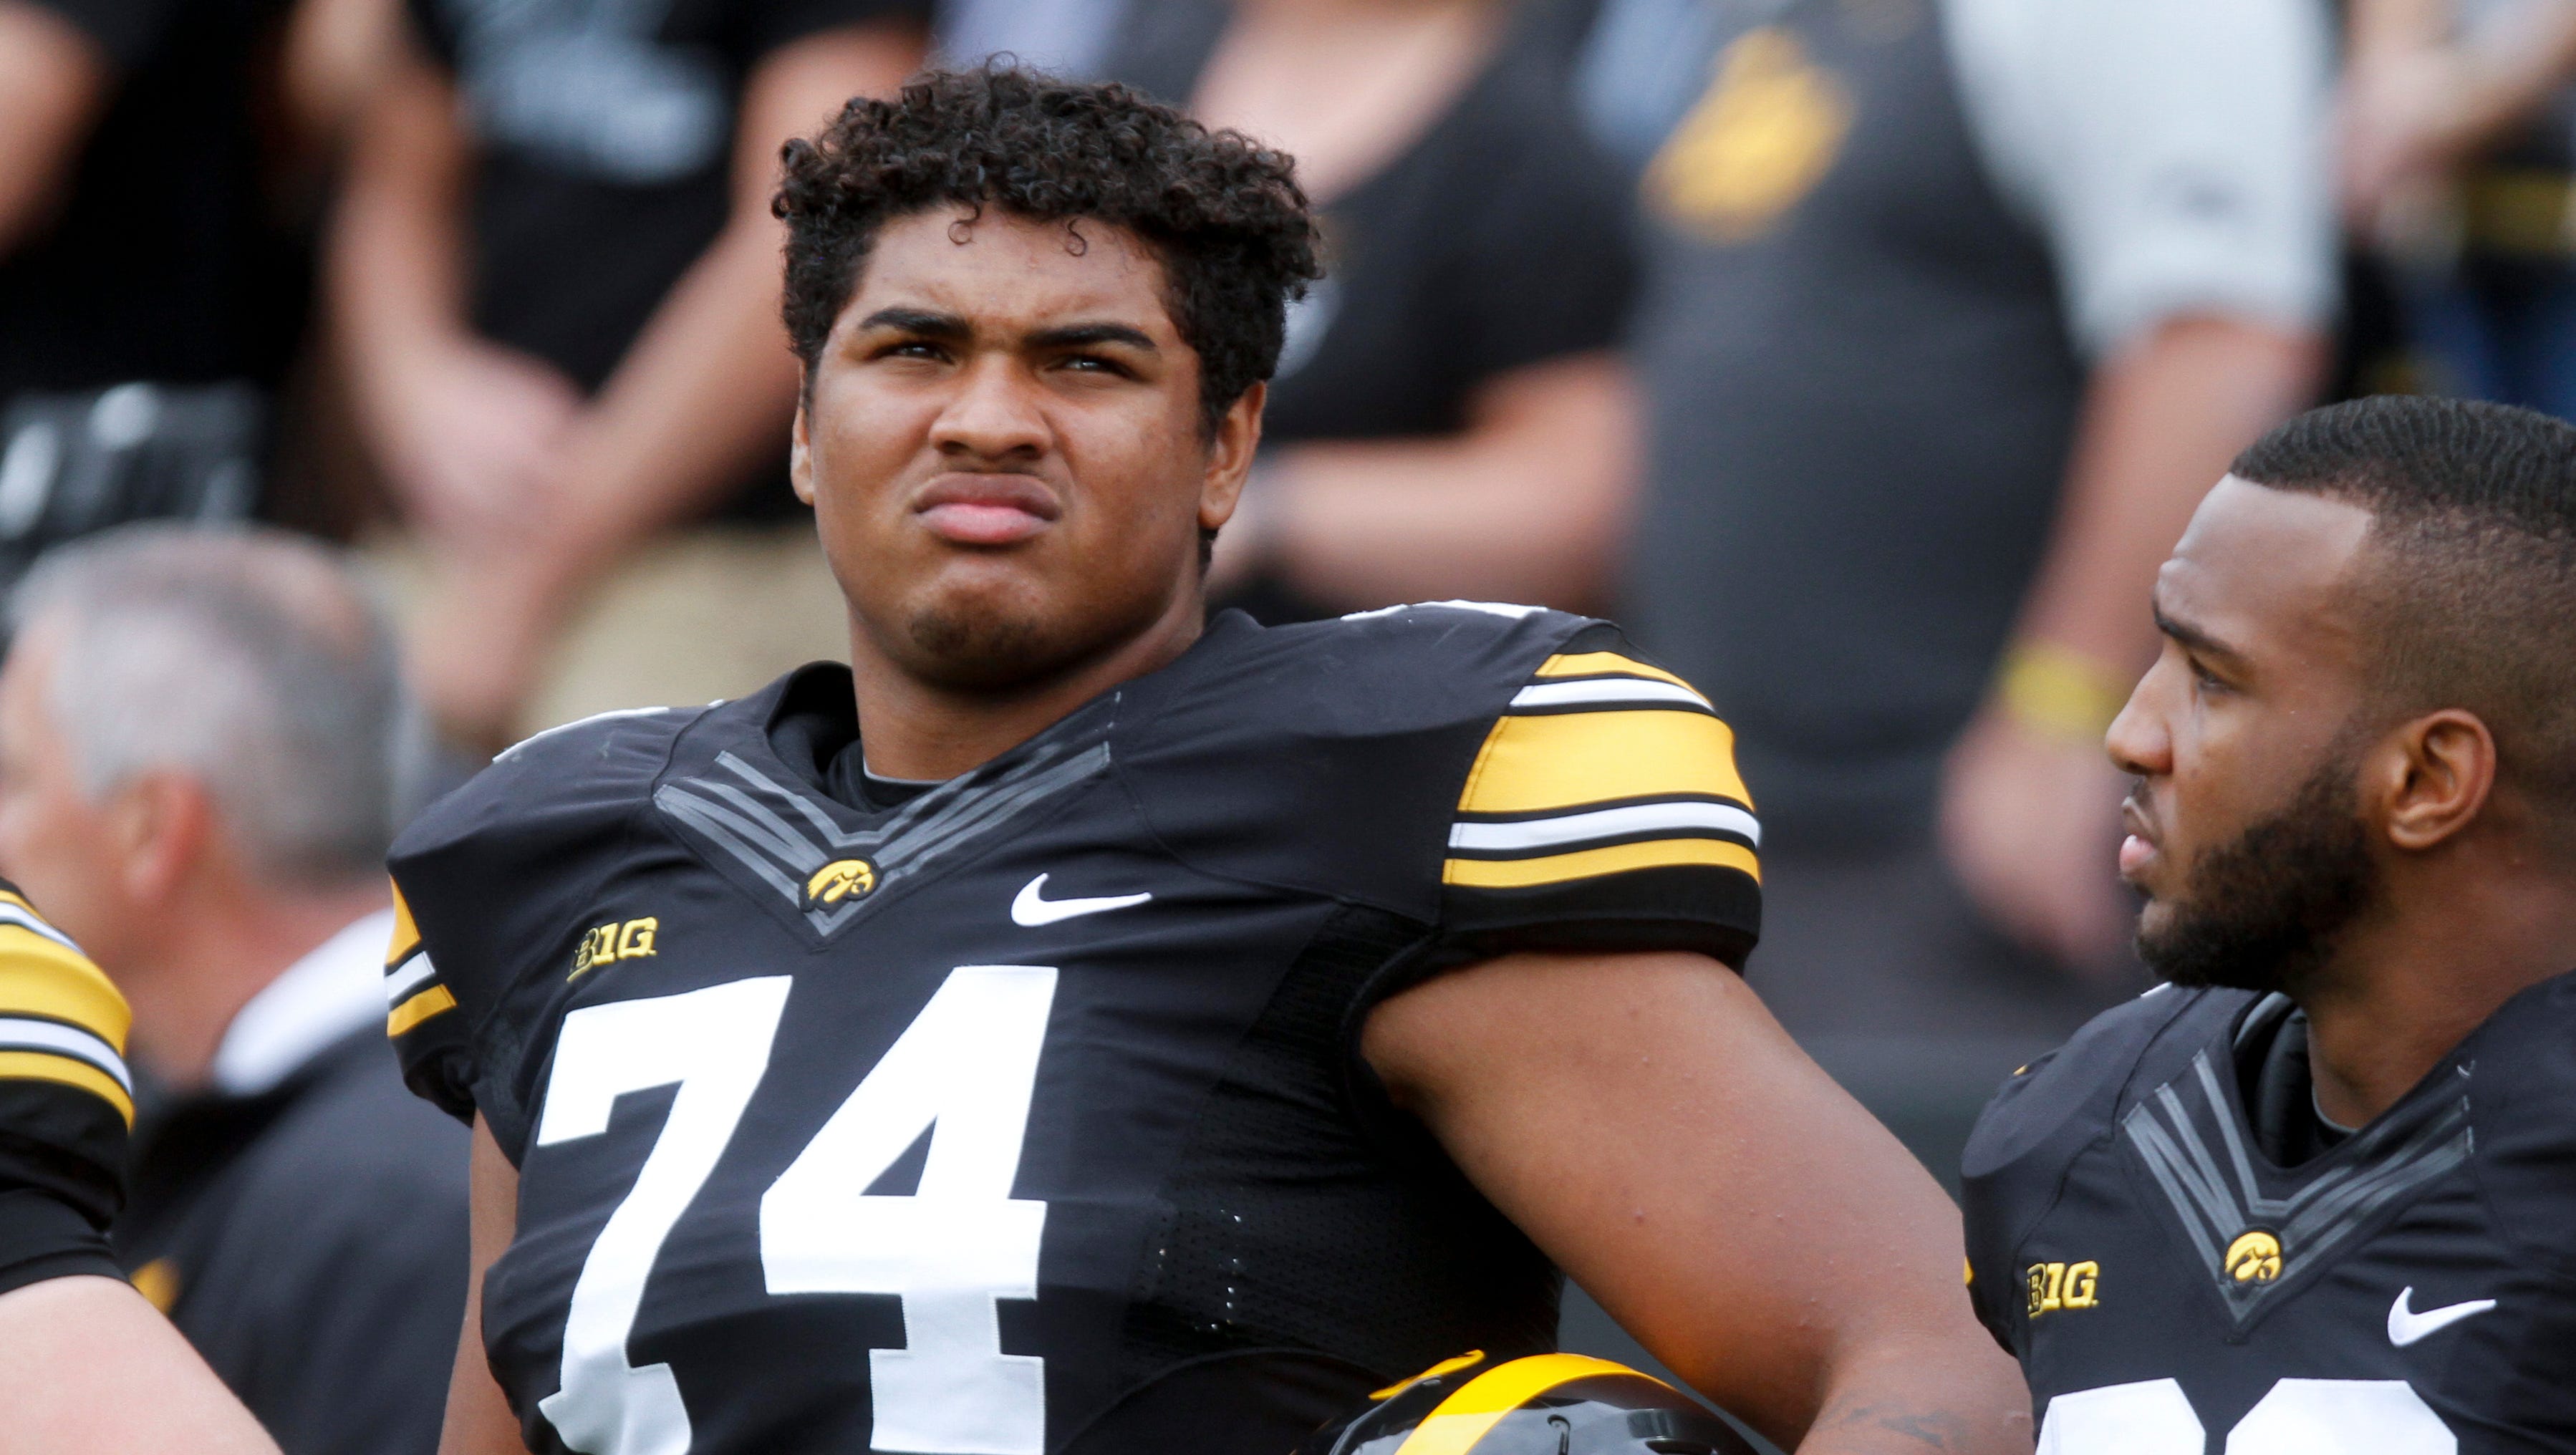 Iowa offensive lineman Tristan Wirfs looks on before the game against the Wyoming Cowboys on September 2, 2017 at Kinnick Stadium.